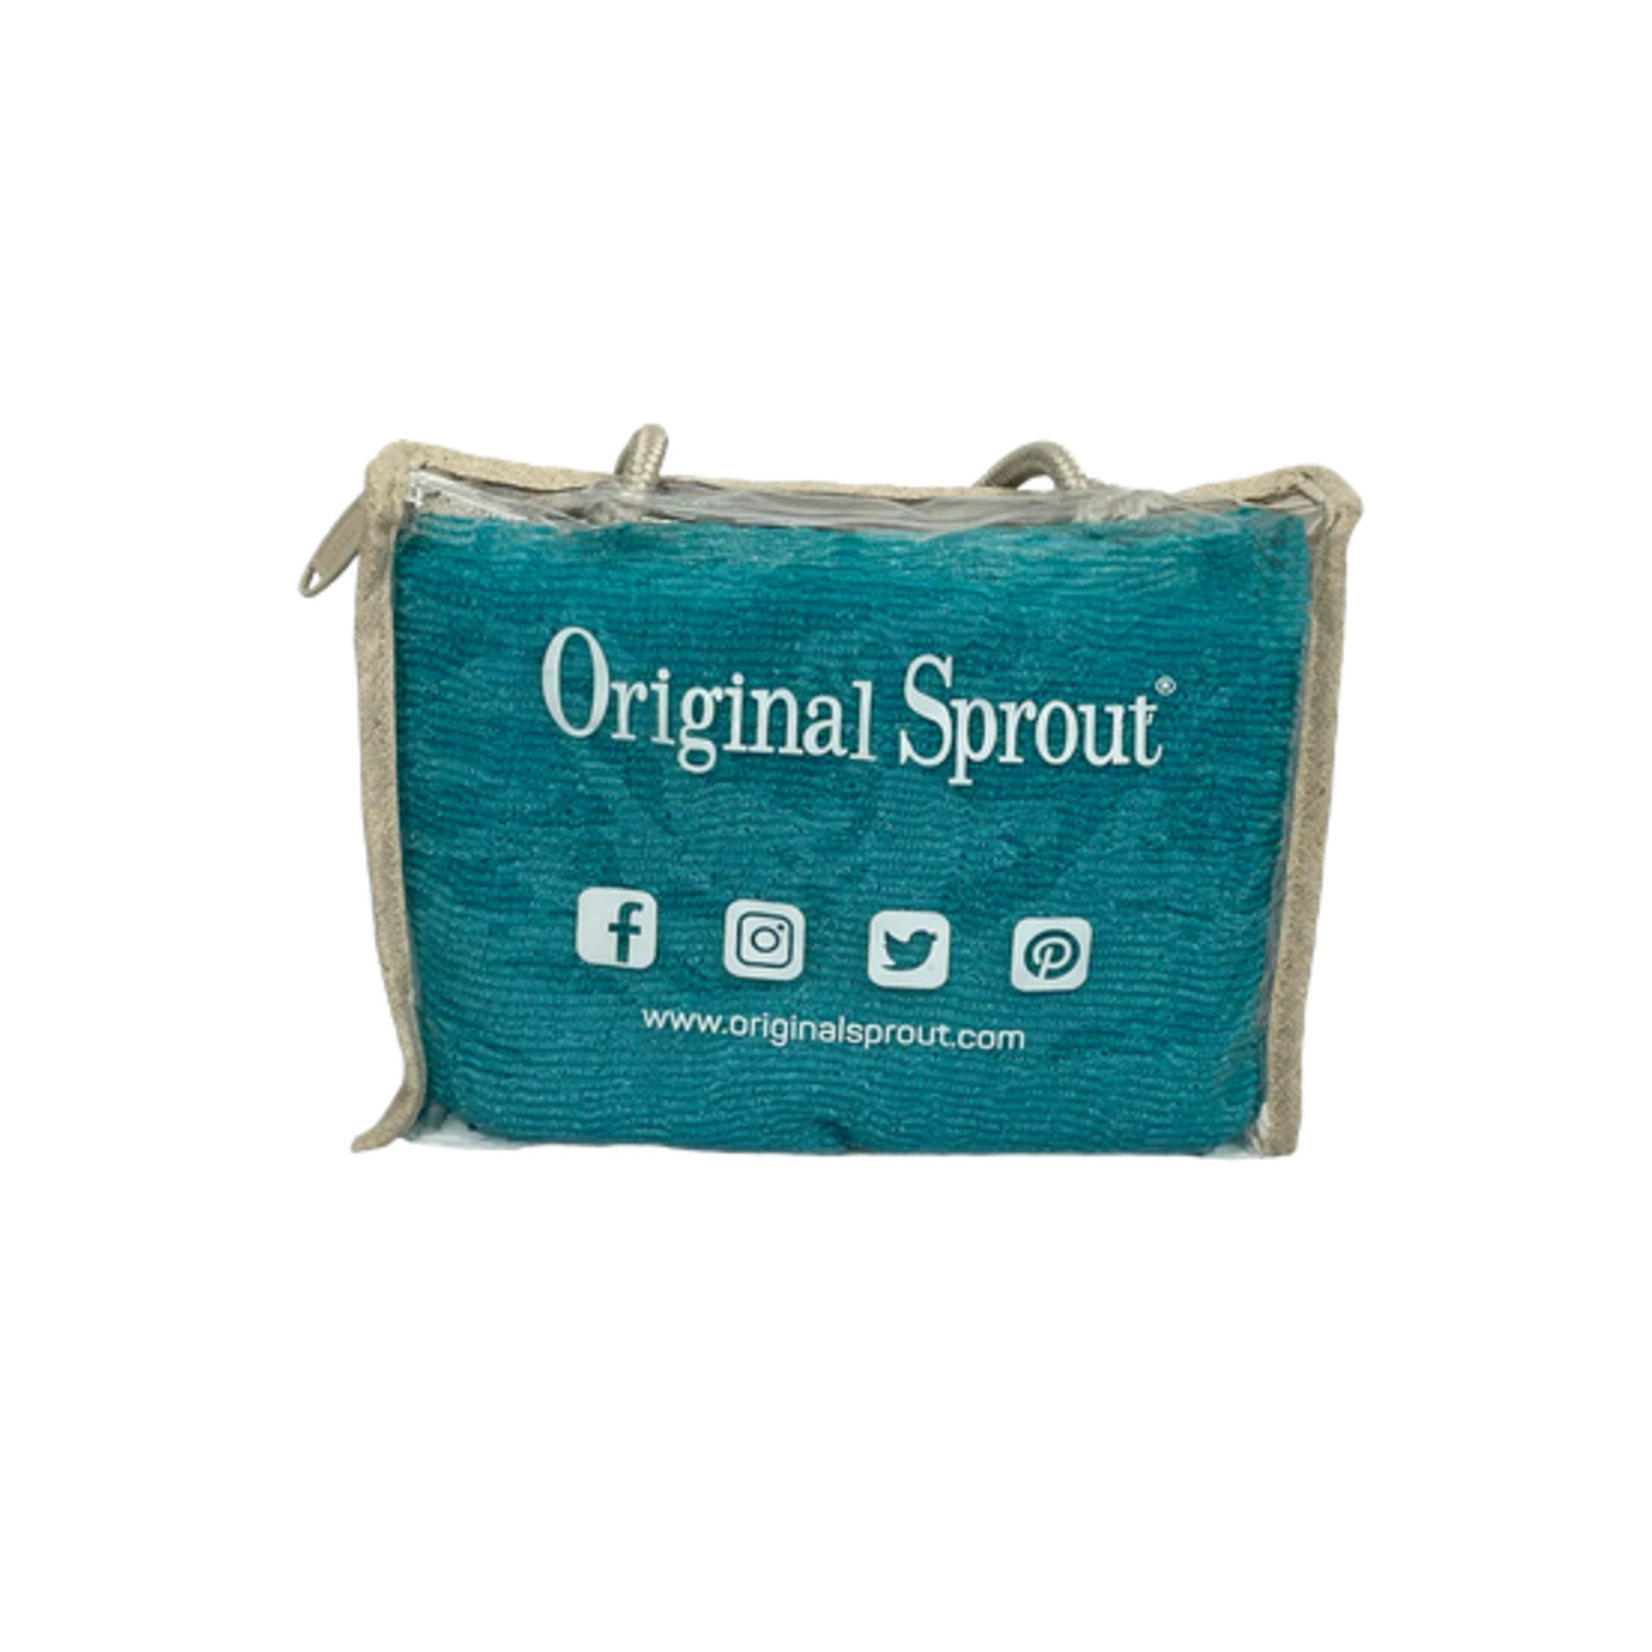 Original Sprout ORIGINAL SPROUT DELUXE TRAVEL KIT